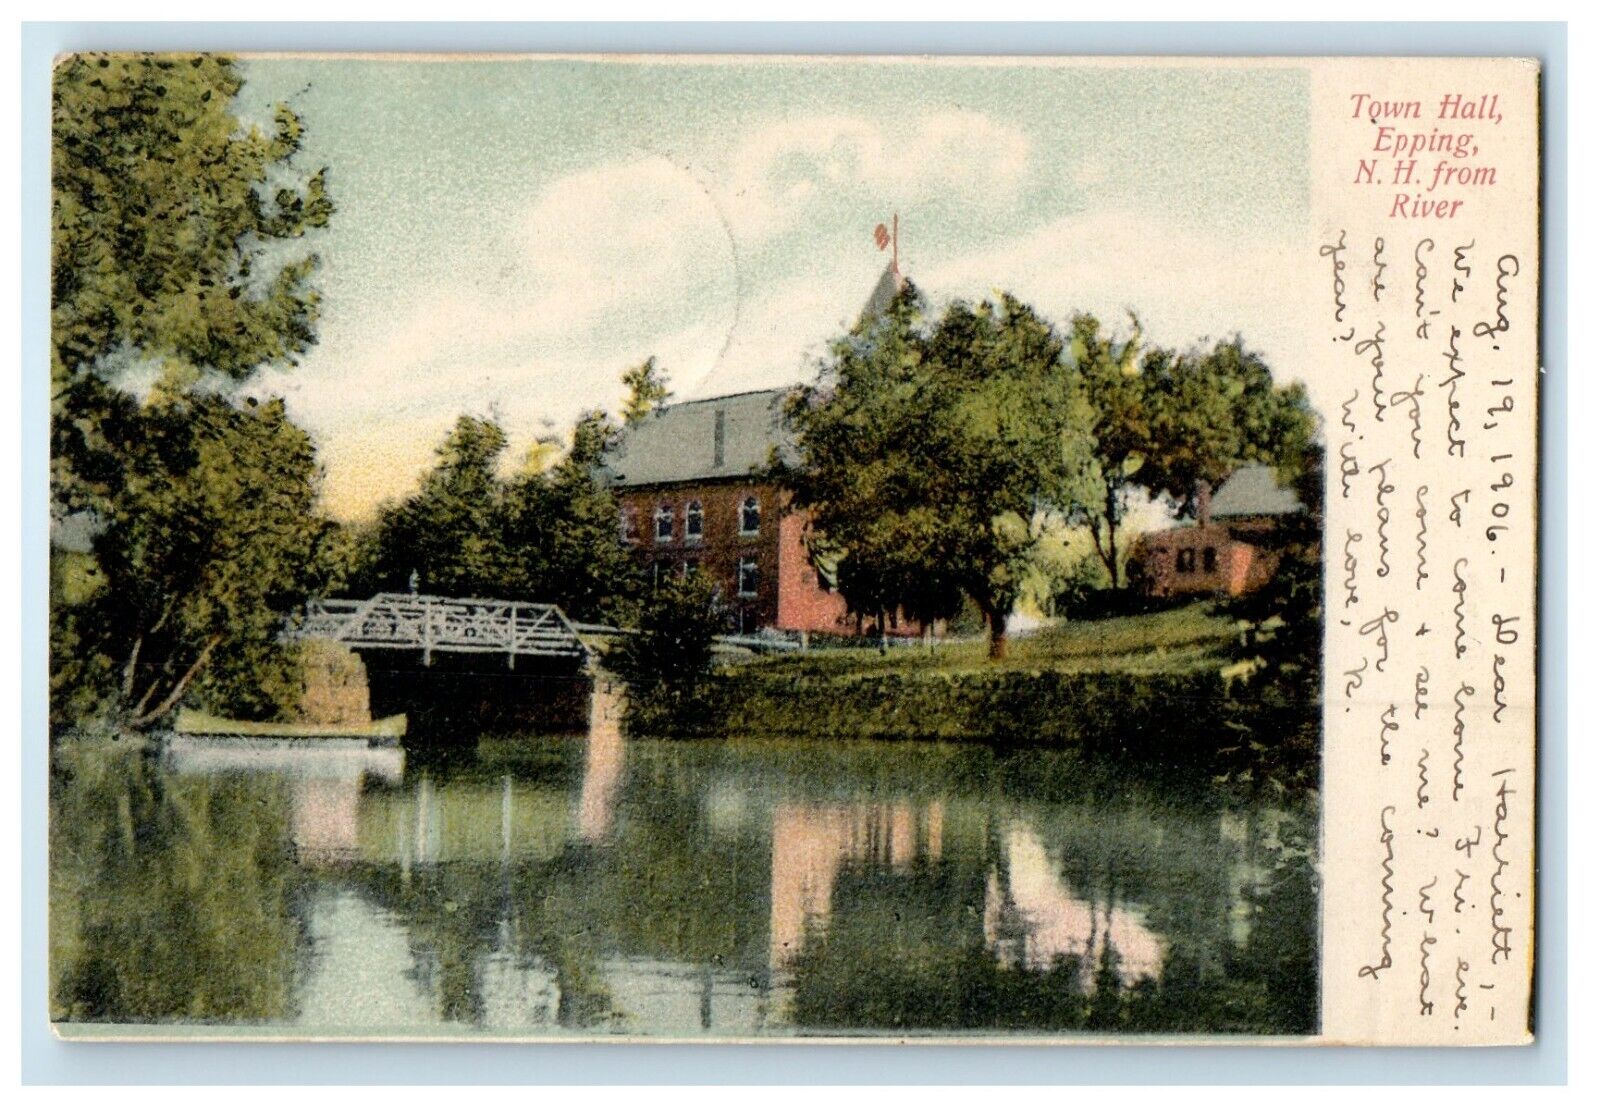 1906 Town Hall From River Bridge Epping New Hampshire NH Posted Antique Postcard